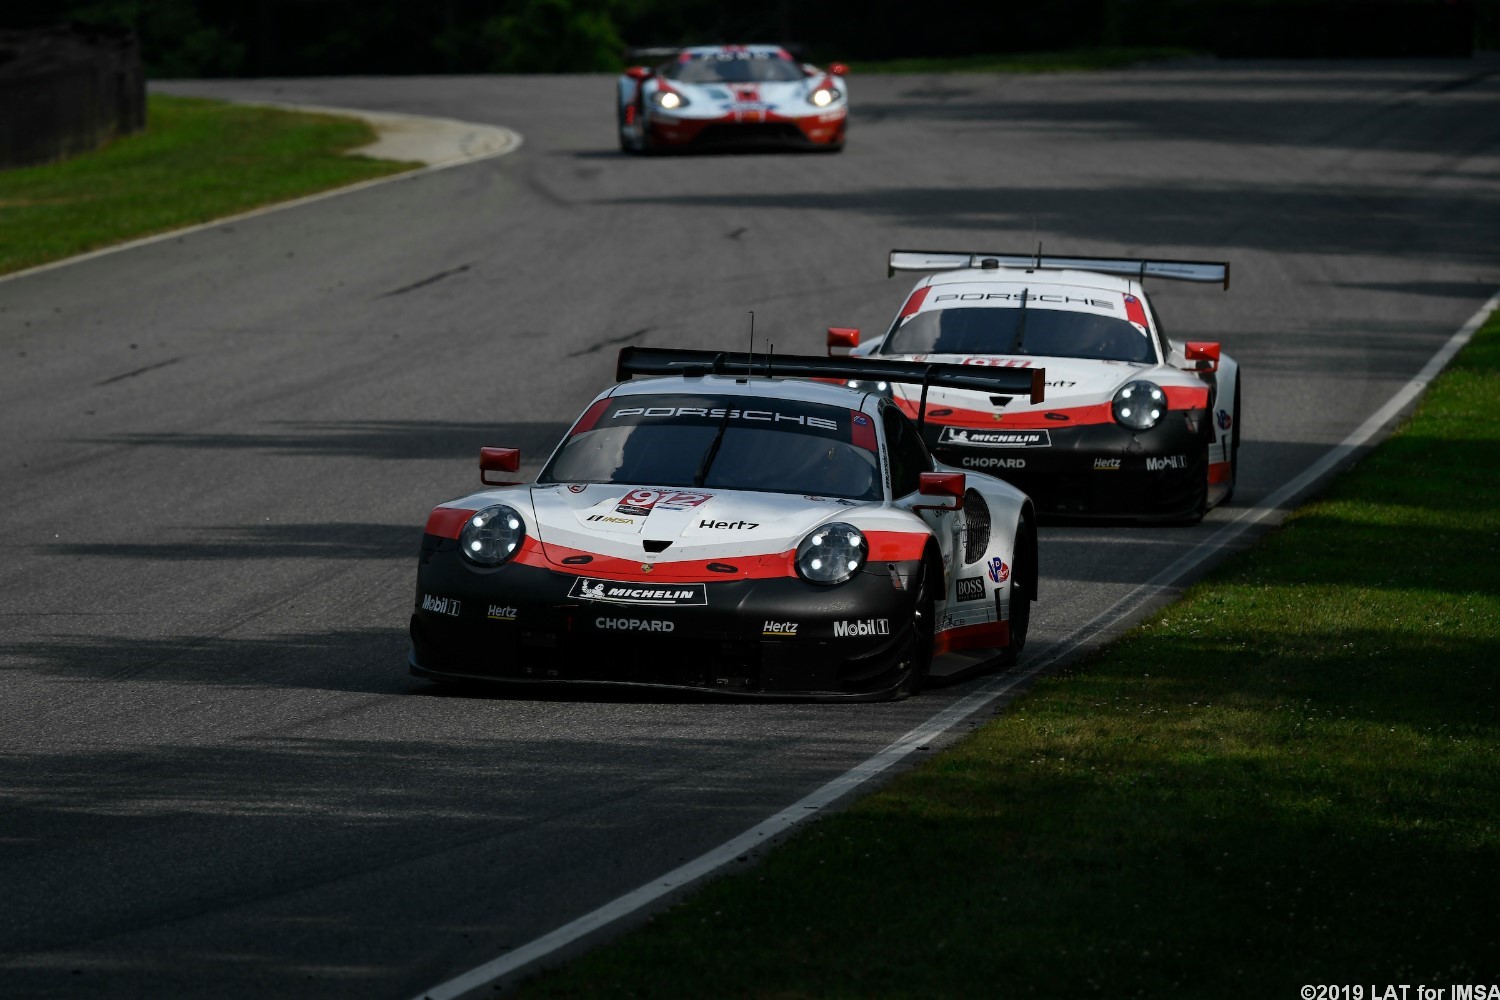 The Porsches dominated early